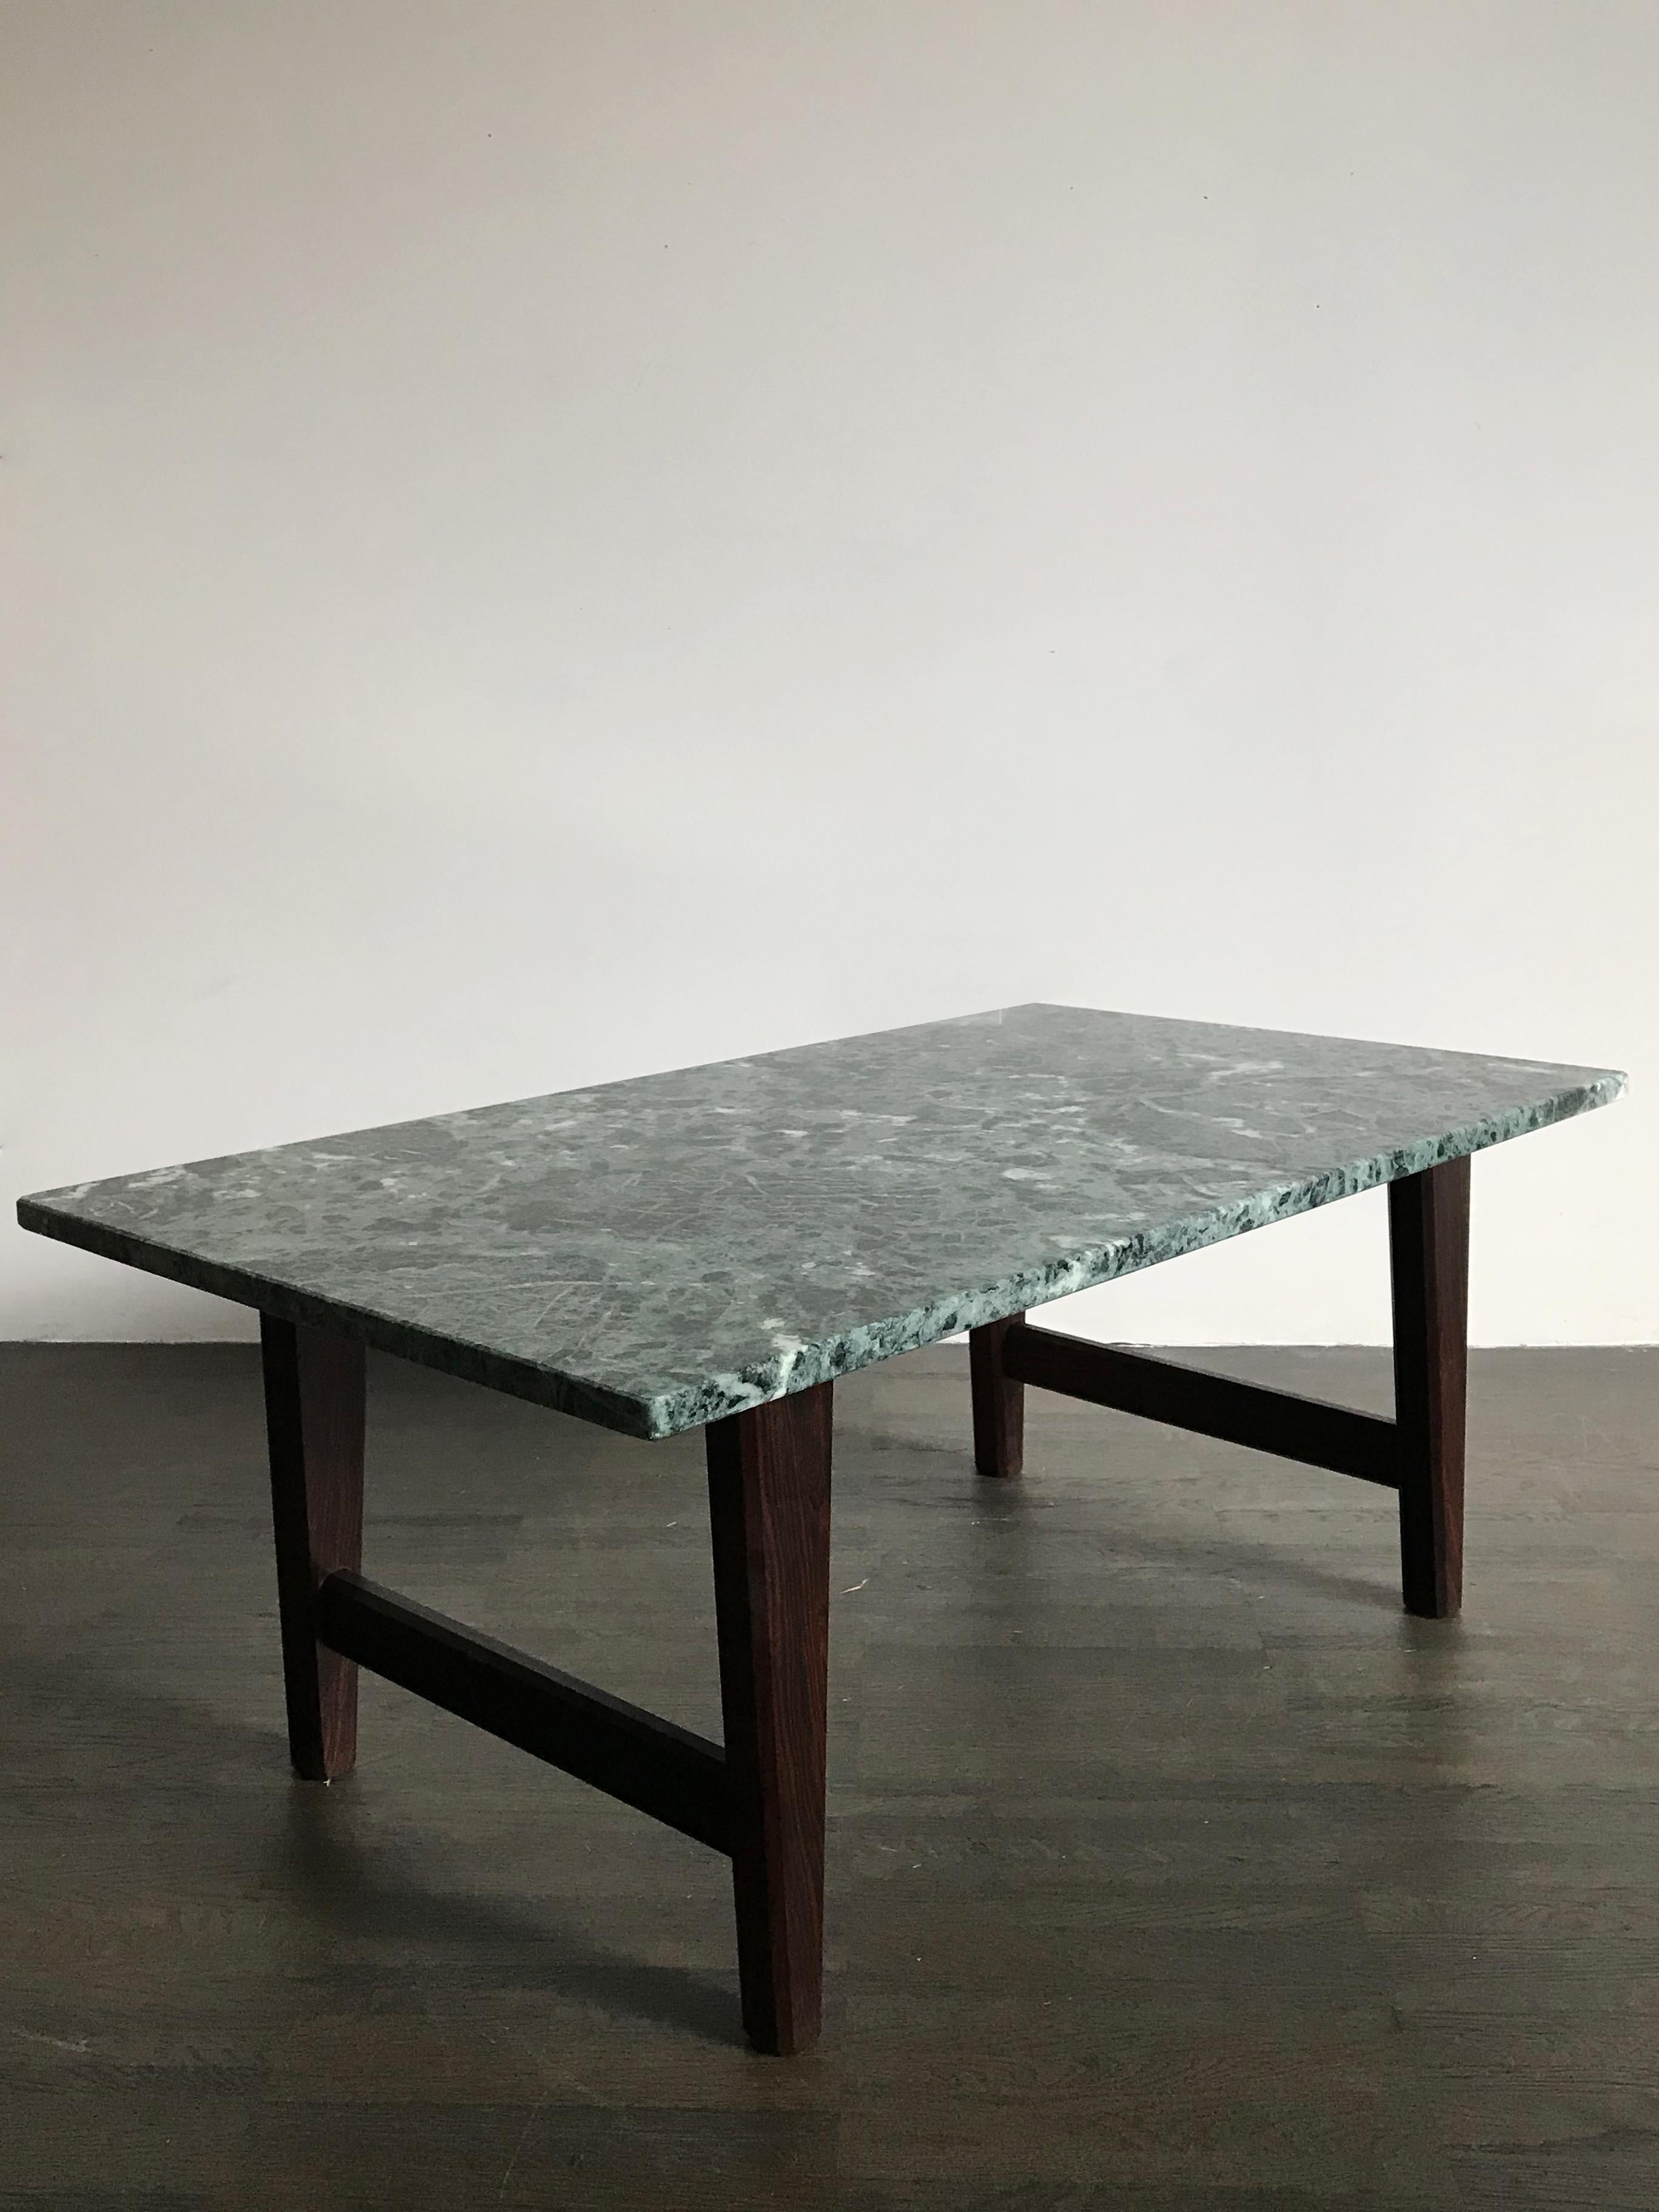 Italian coffee table with dark wooden legs and amazing green Alpi marble top, 1960s.
The top is in very excellent condition, no broken no scratch.
Please note that the coffee table is original of the period and thus shows normal signs of age and